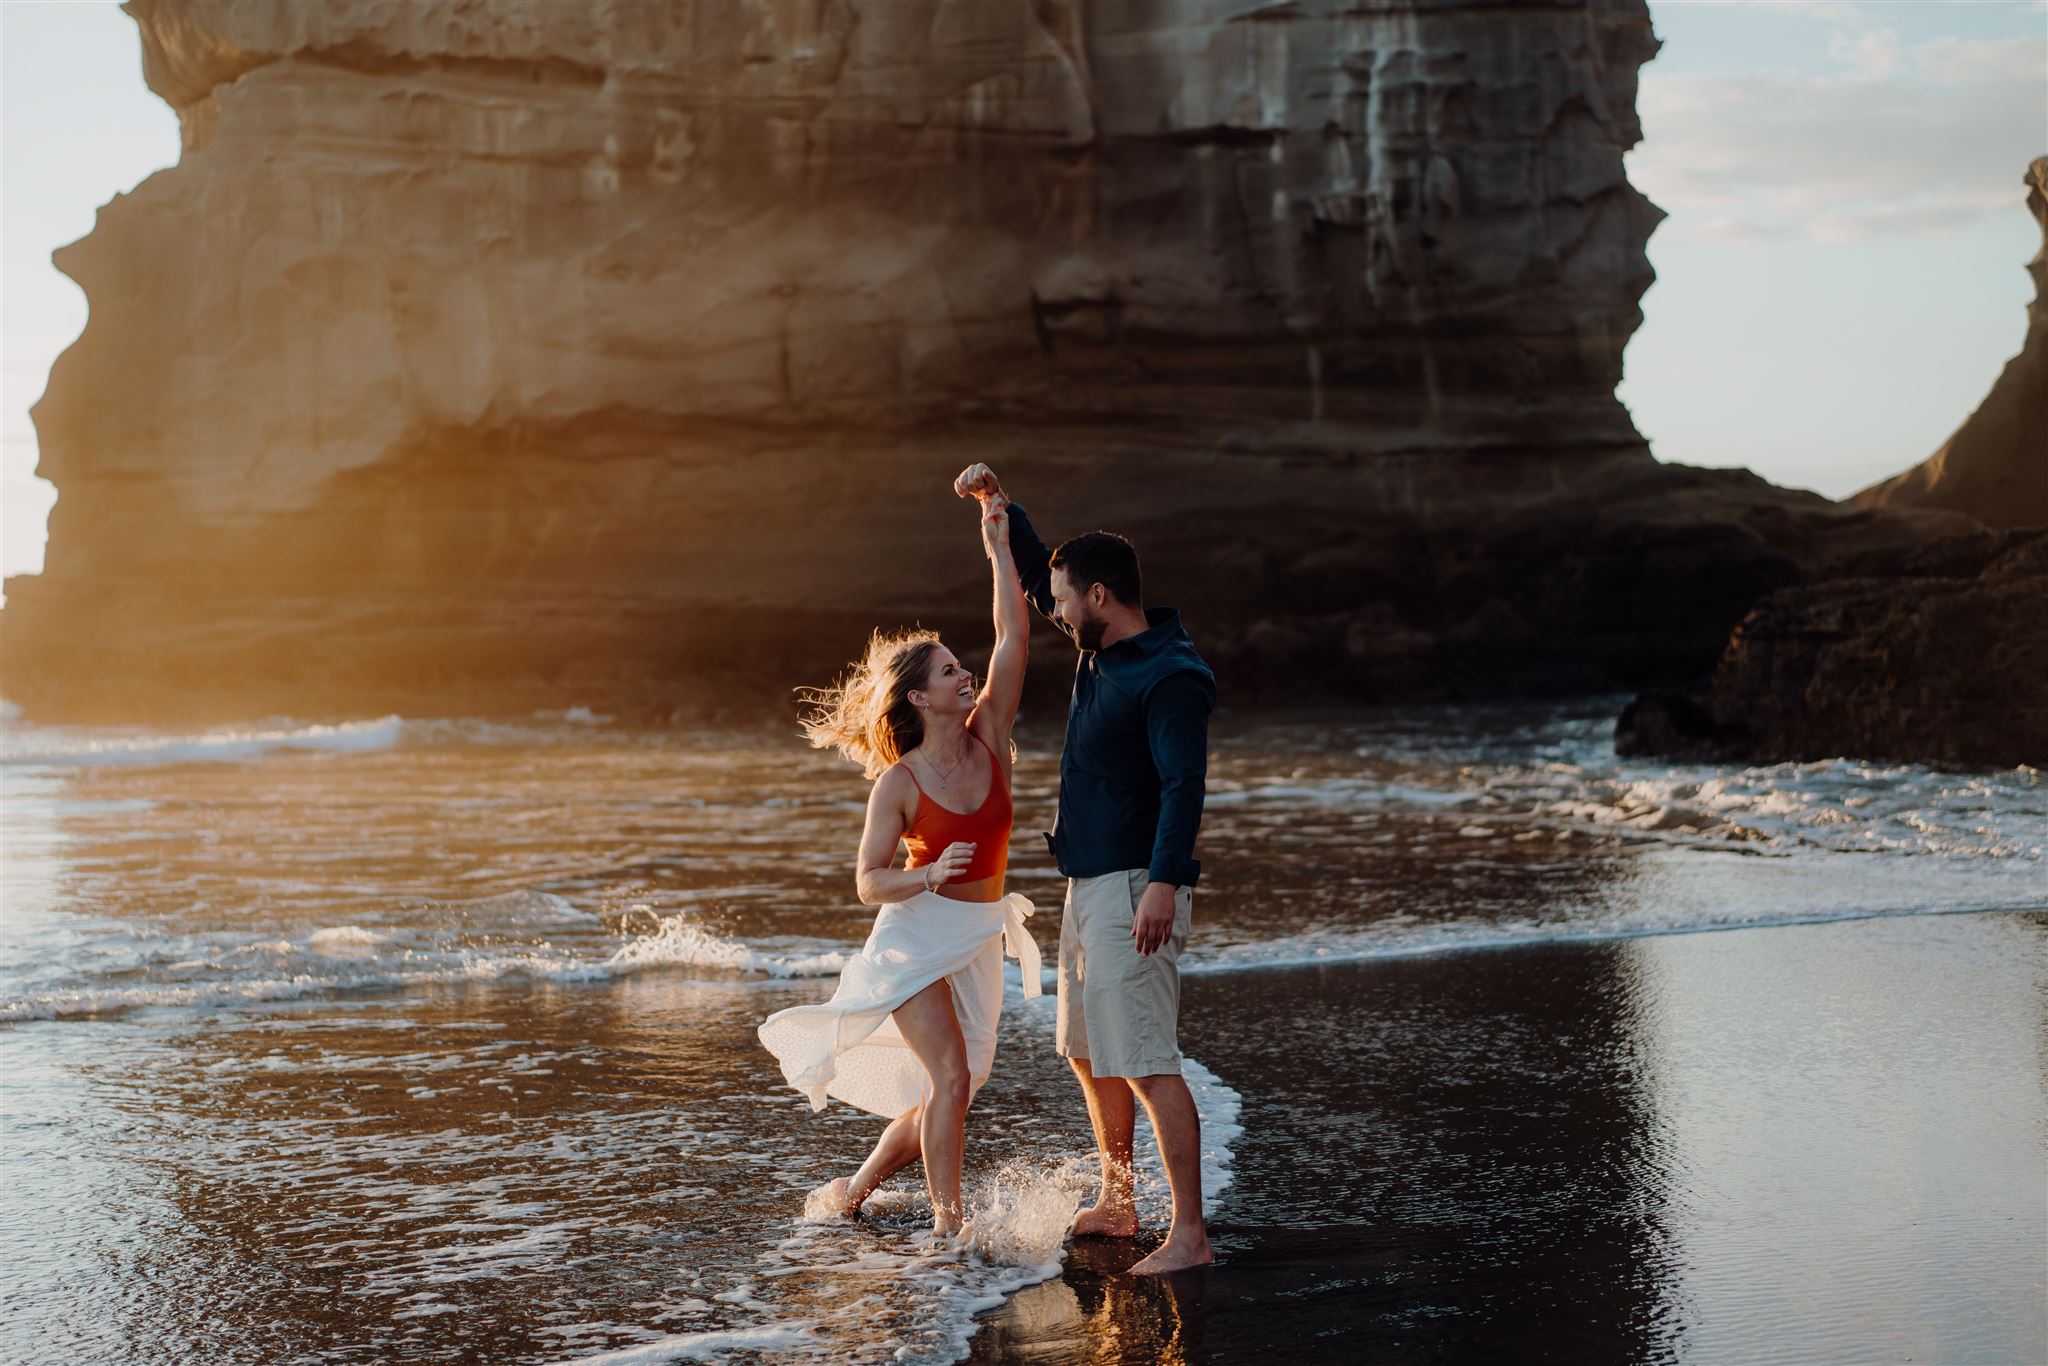 A couple dancing on the beach during an engagement photoshoot at Muriwai by the Gannet Colony Cliffs, photographed by wedding photographer haley adele photography